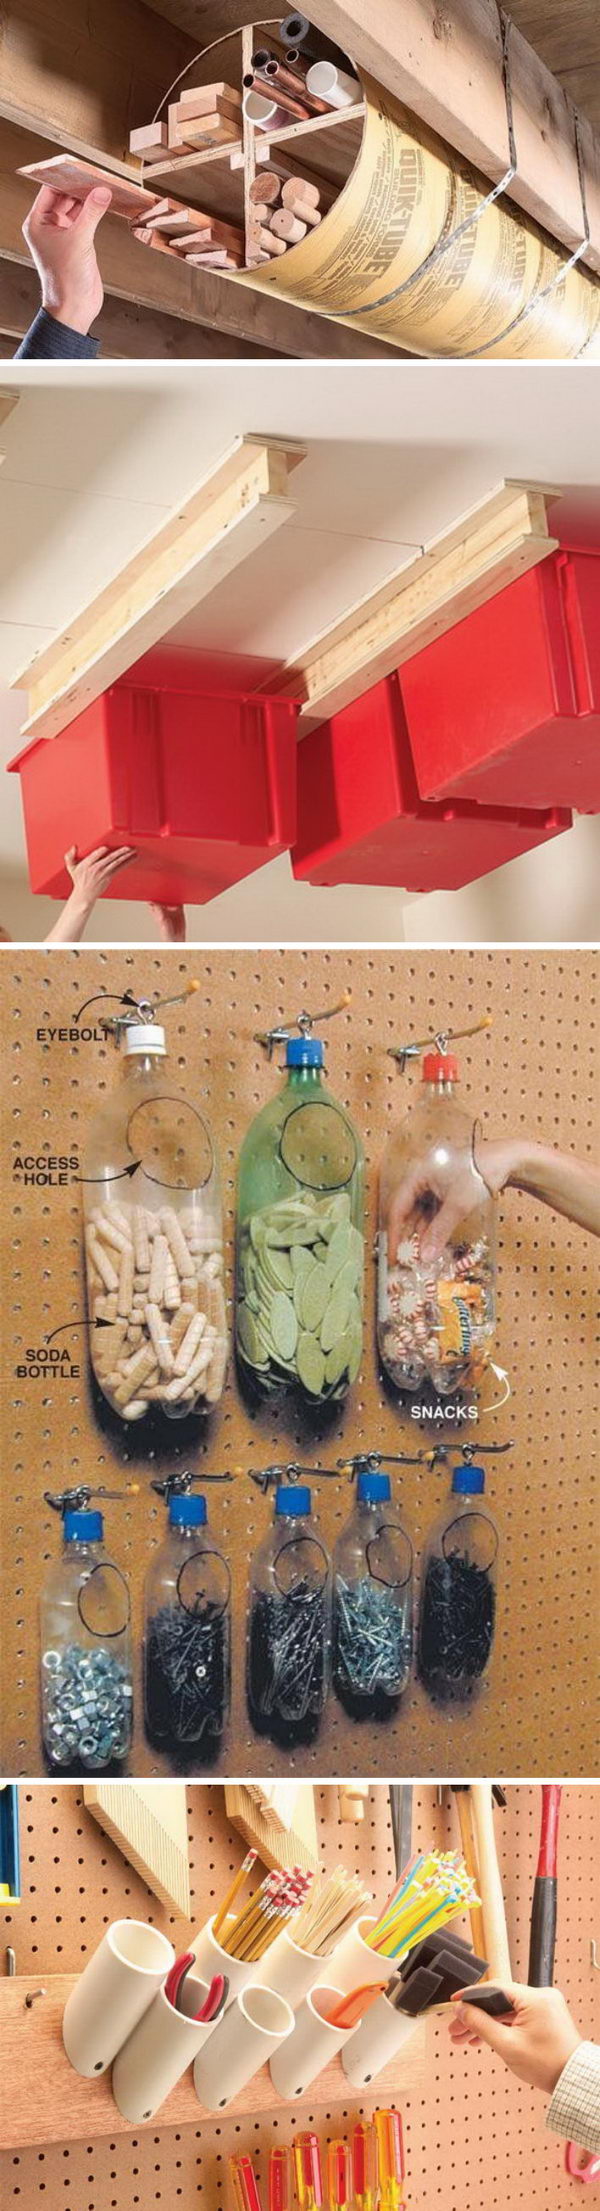 Clever ideas for storage and organization in the garage!